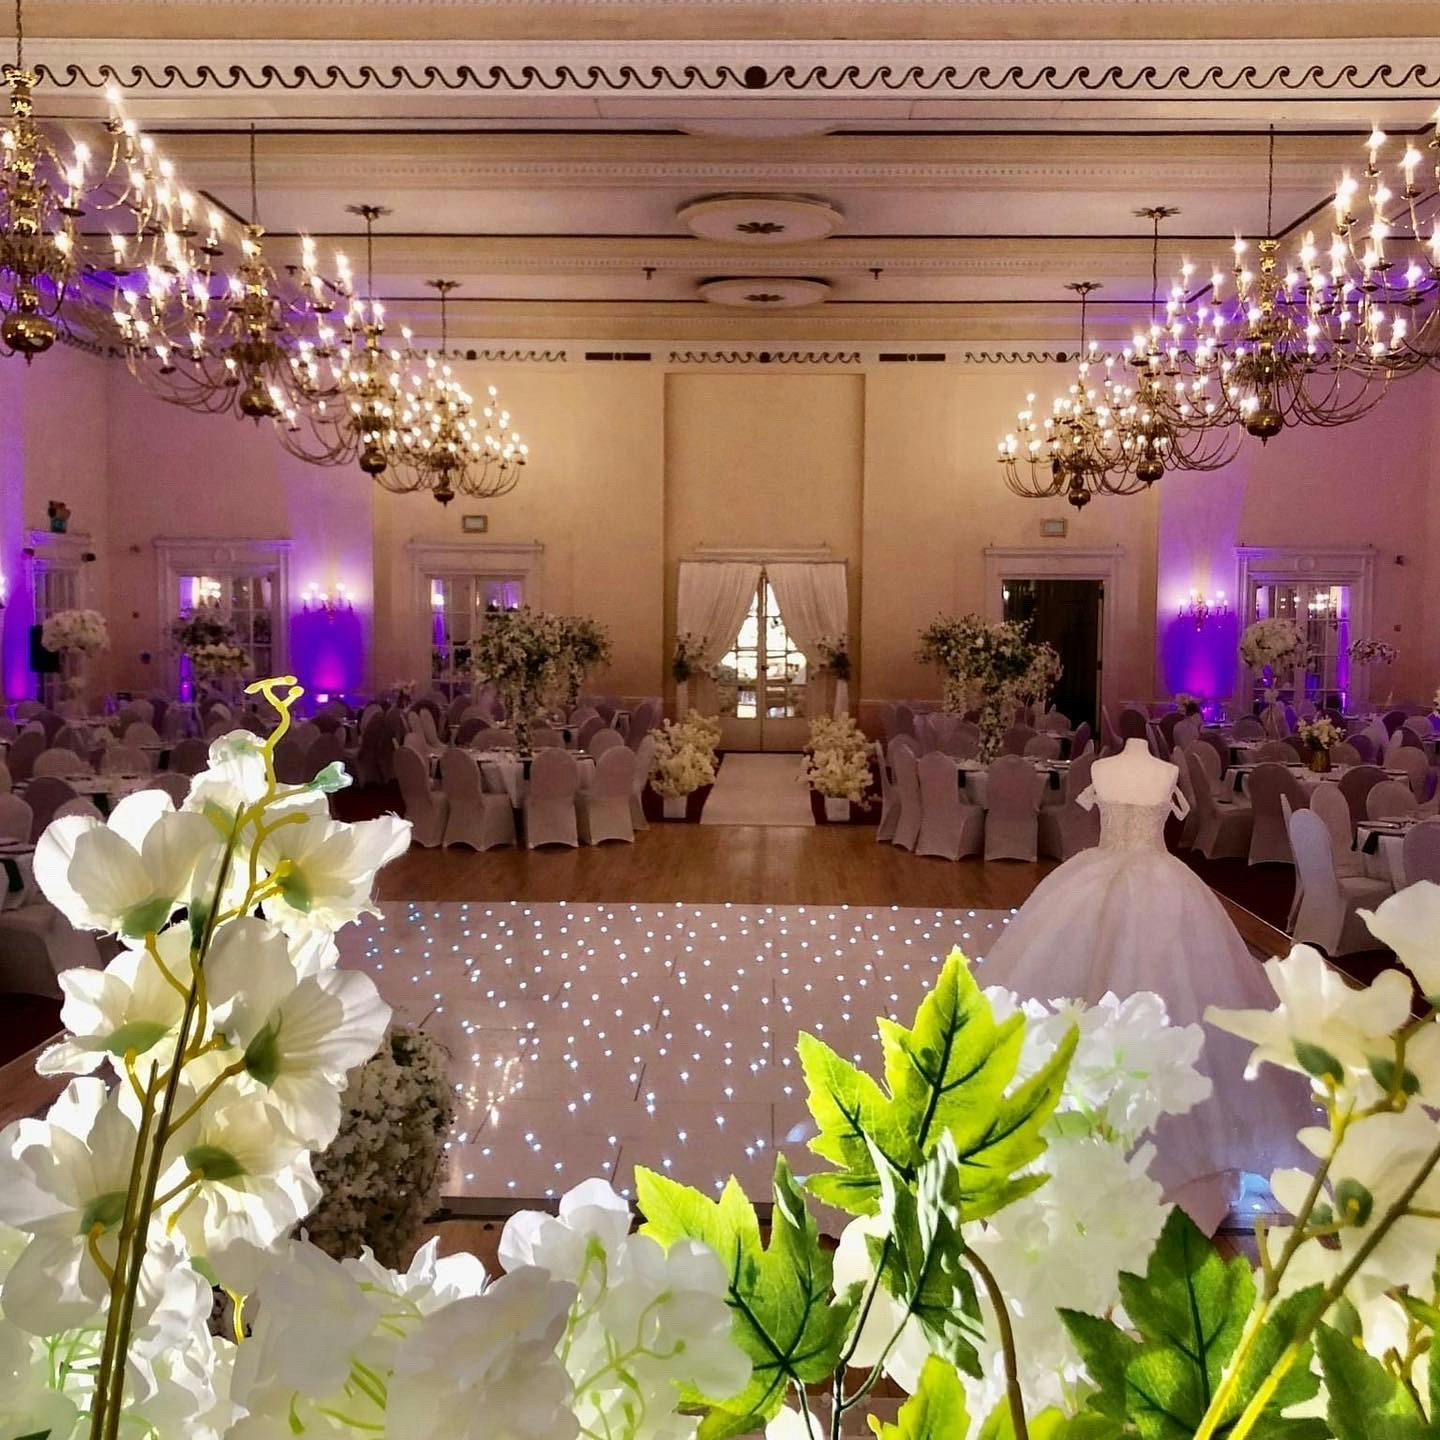 The Adelphi Hotel - Banqueting Hall image 4